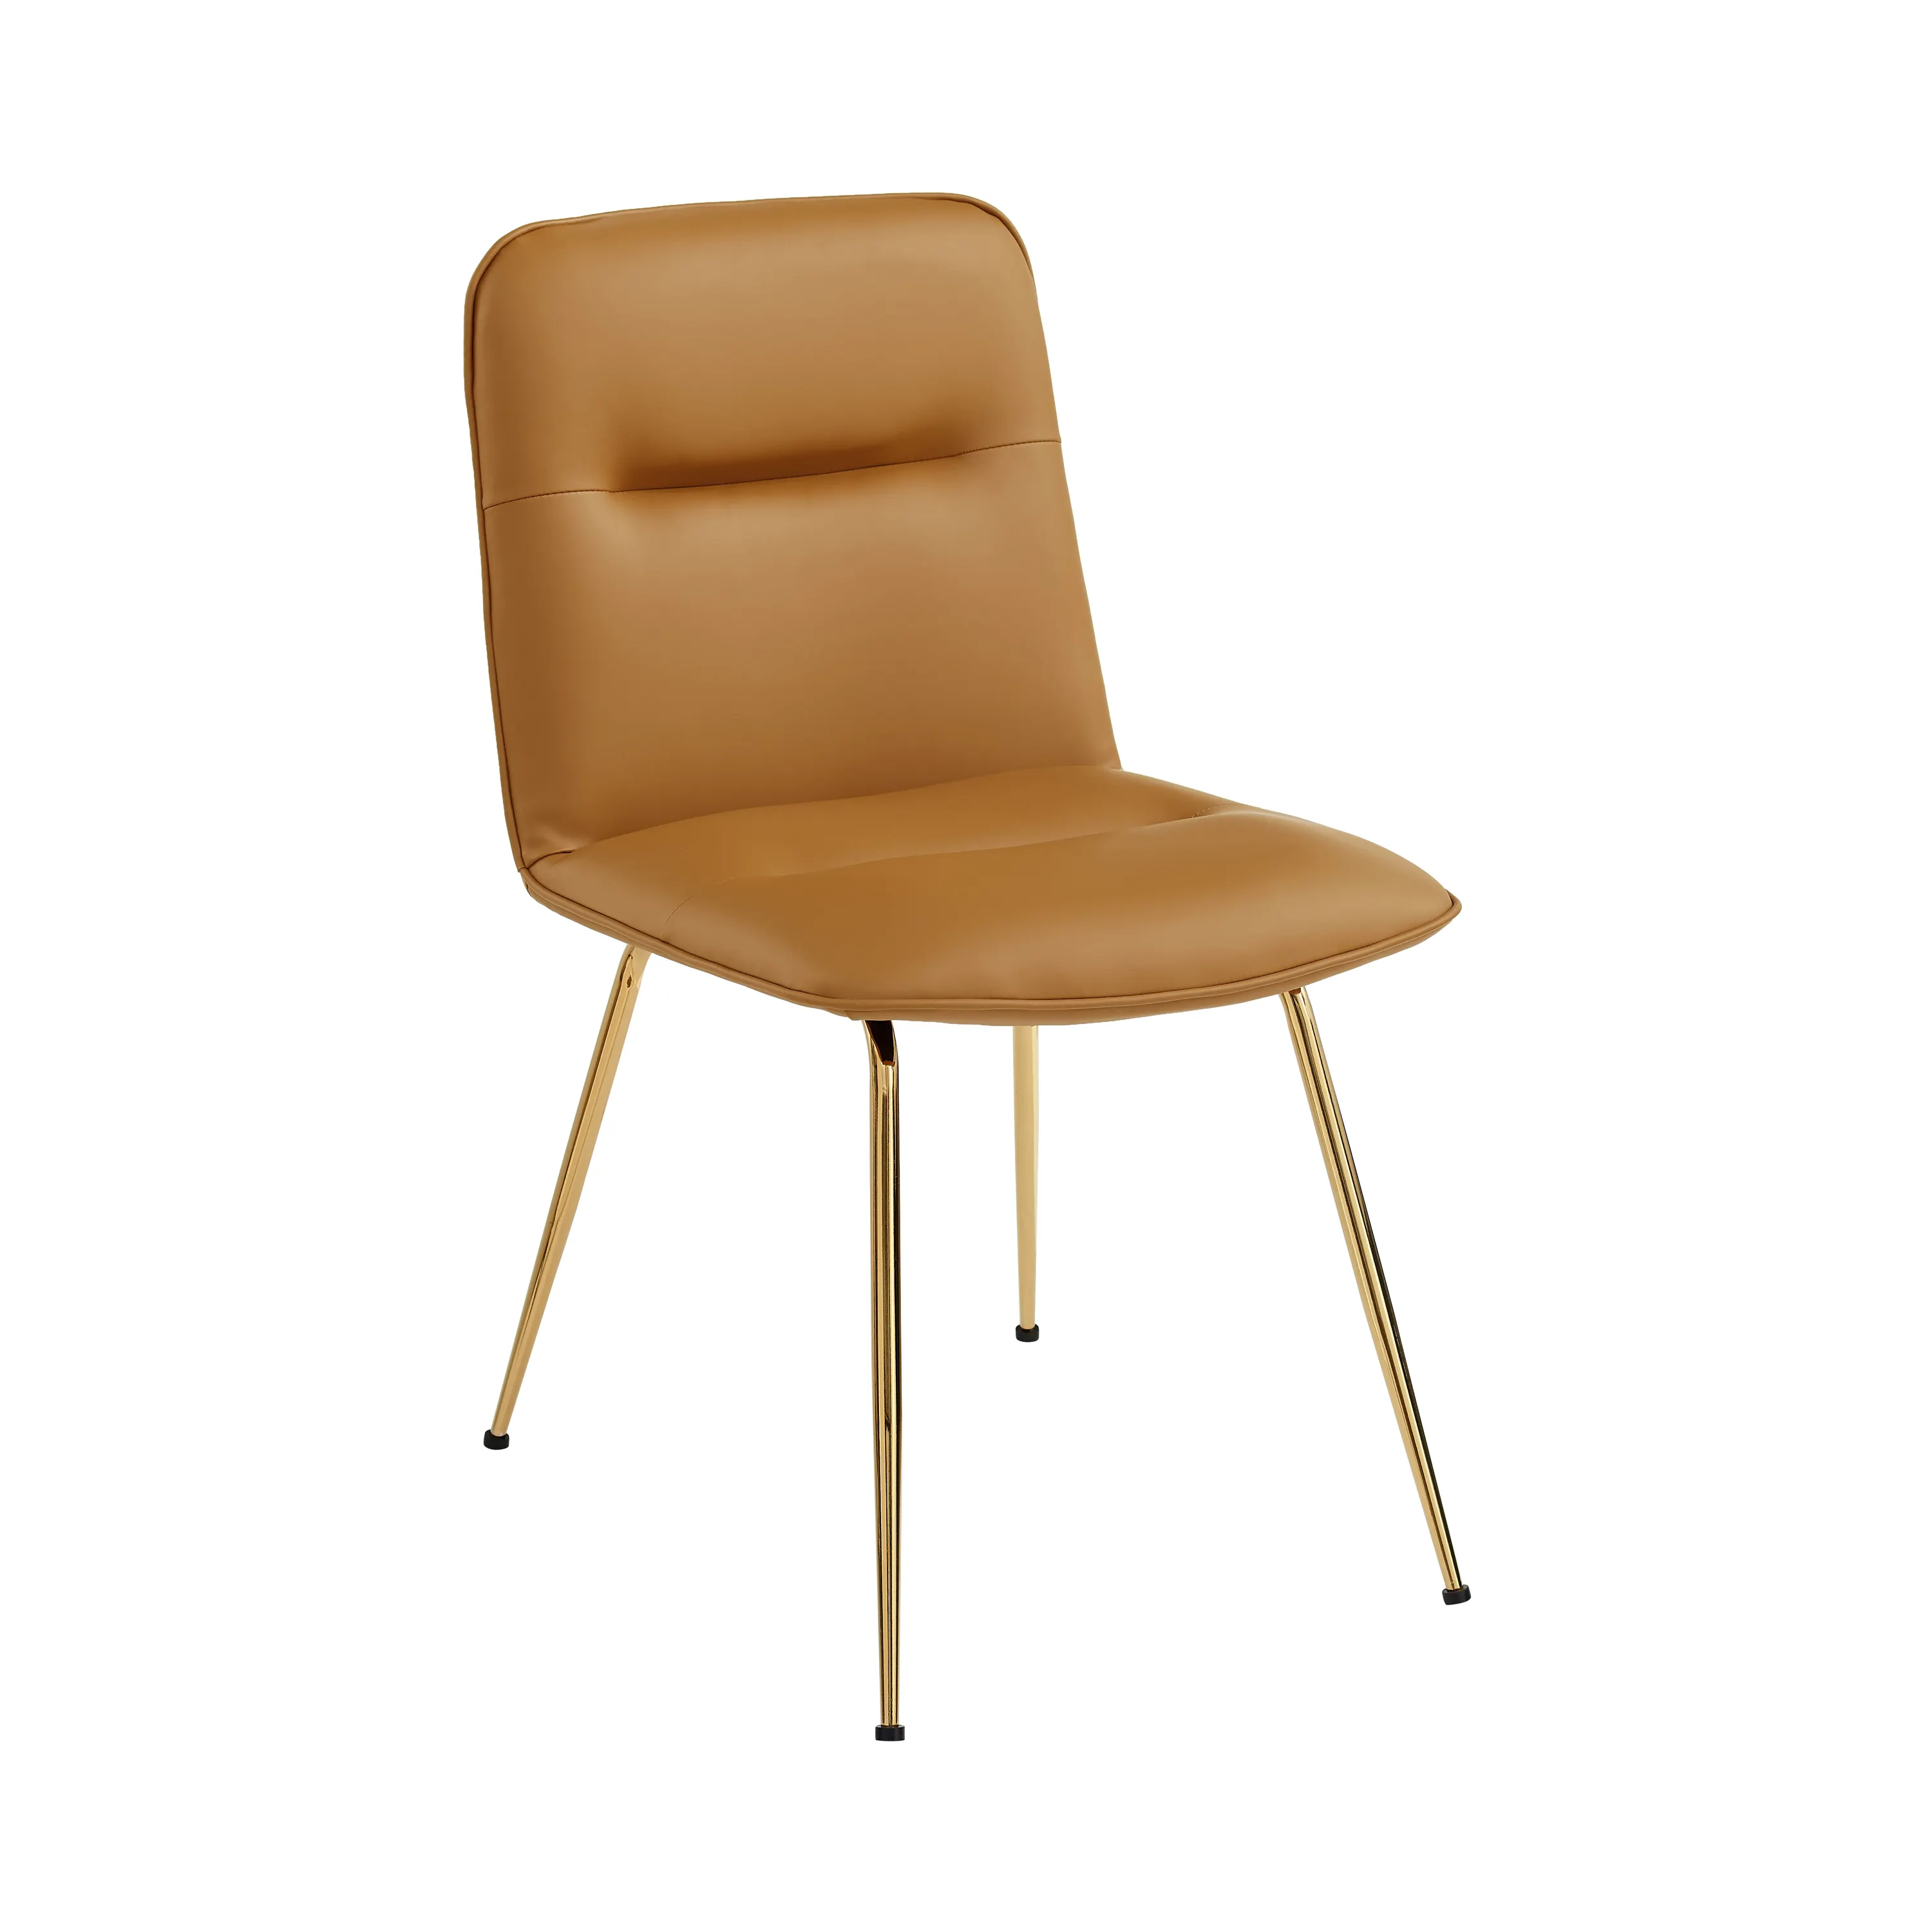 New arrivals Velvet Upholstered Chairs Modern Armless Side Chairs with Golden Metal Legs Brown Dining Chairs